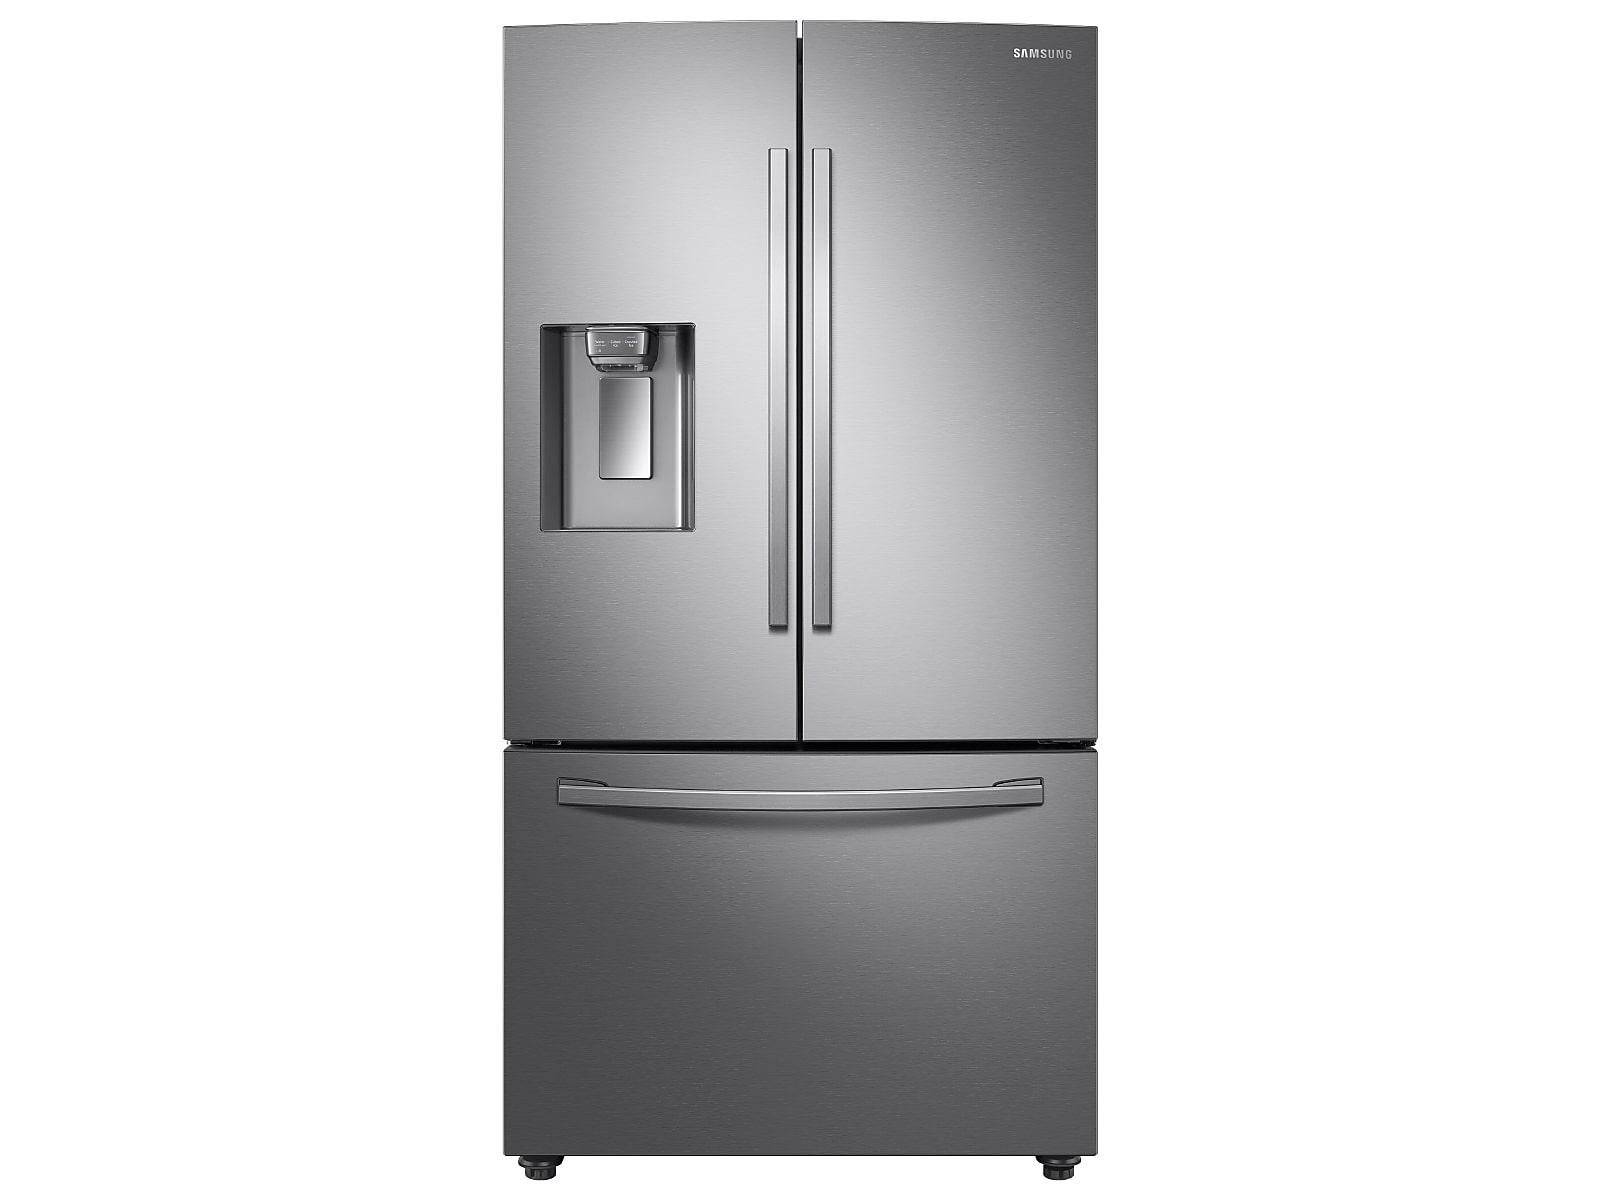 Samsung 28 cu. ft. 3-Door French Door Refrigerator with AutoFill Water Pitcher in Silver(RF28R6221SR/AA)